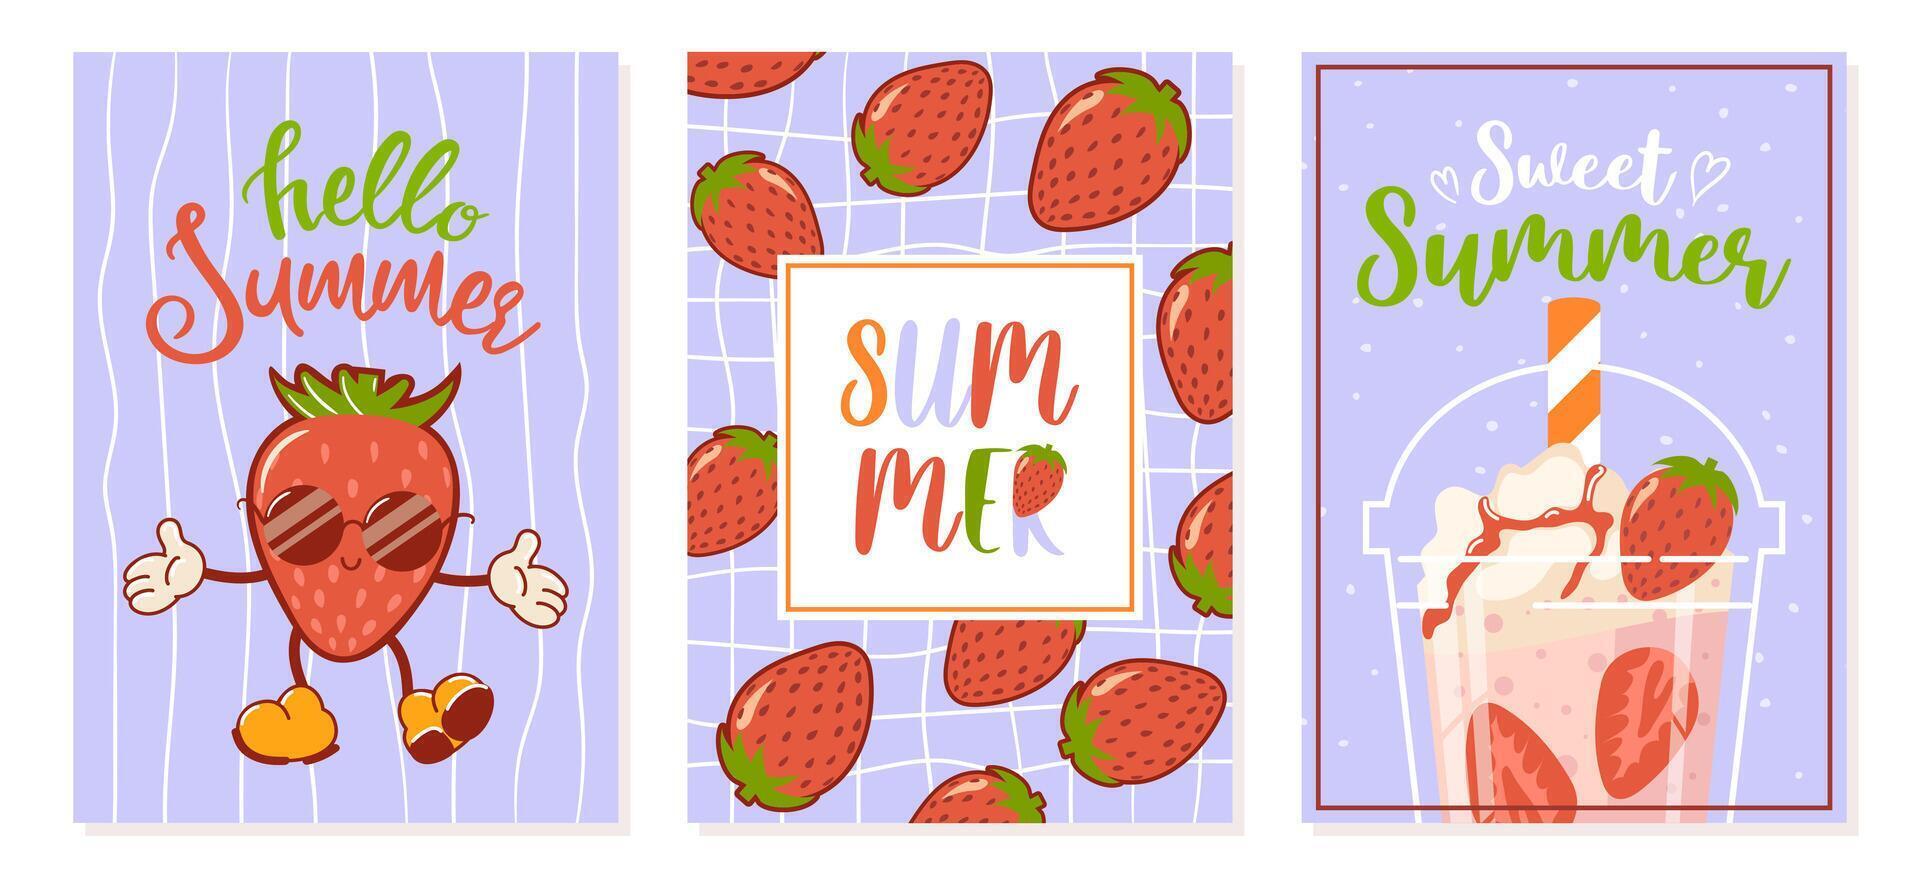 Hello summer. Set of postcards, banners for sale. Cool strawberry in sunglasses, a cute retro cartoon character. Berry cocktail with whipped cream. Groovy, vintage. Trendy old style. 1970s vector